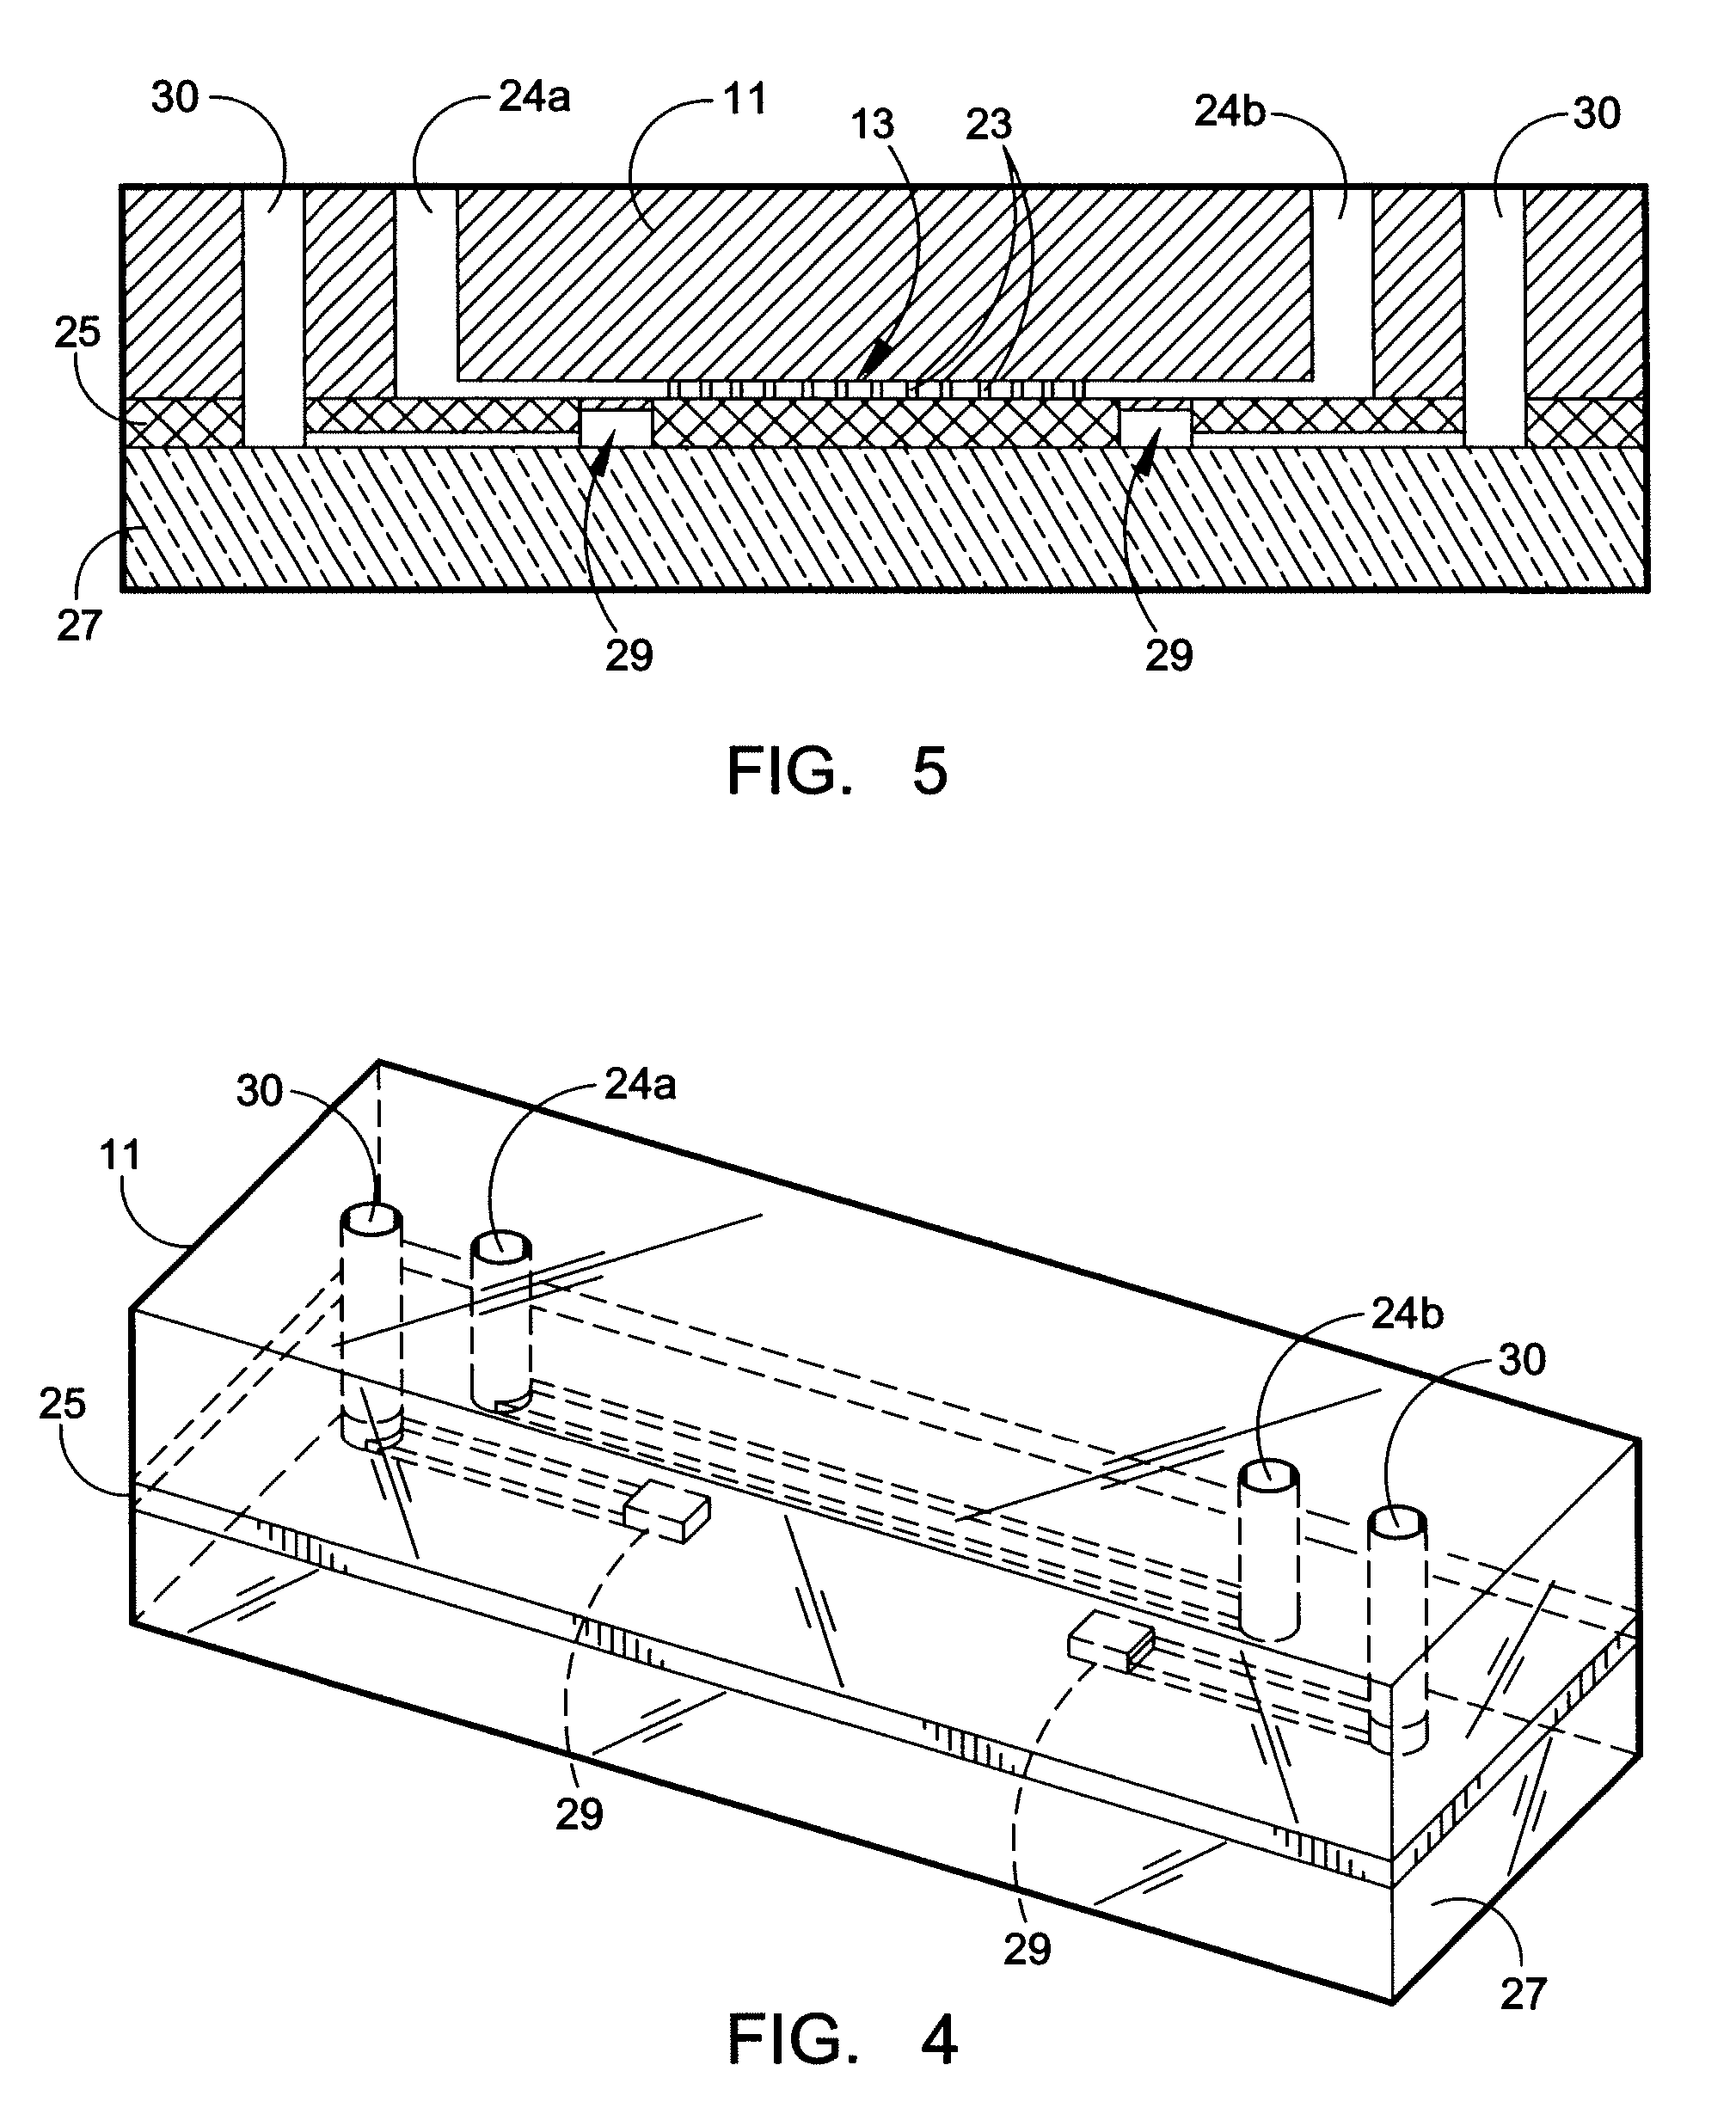 Recovery of rare cells using a microchannel apparatus with patterned posts